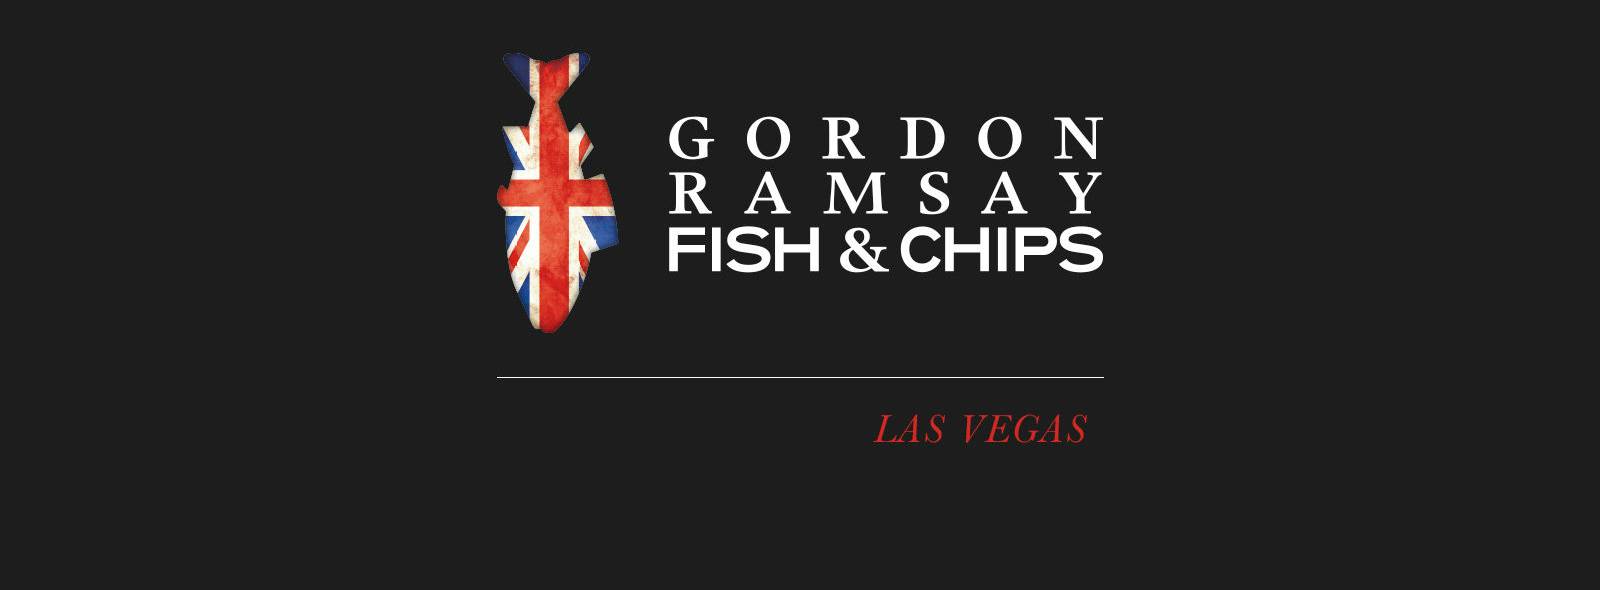 GRG249 FISH AND CHIPS BANNER 3 updated